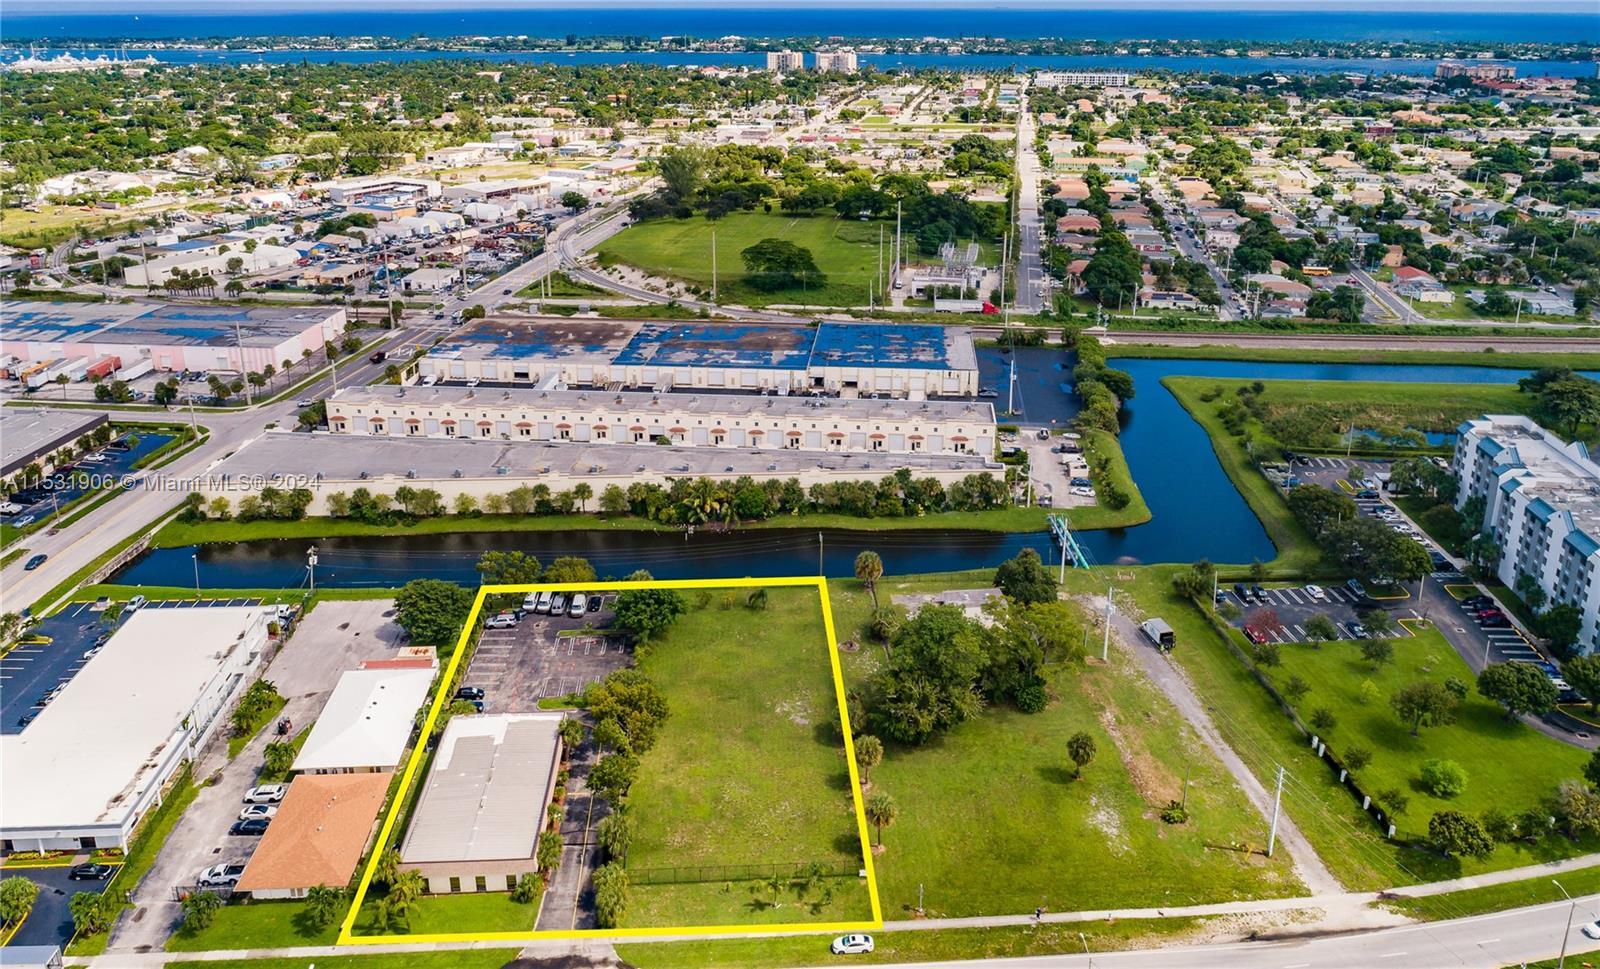 Proud to exclusively represent for sale 2460-2508 N Australian Ave in West Palm Beach. This covered 